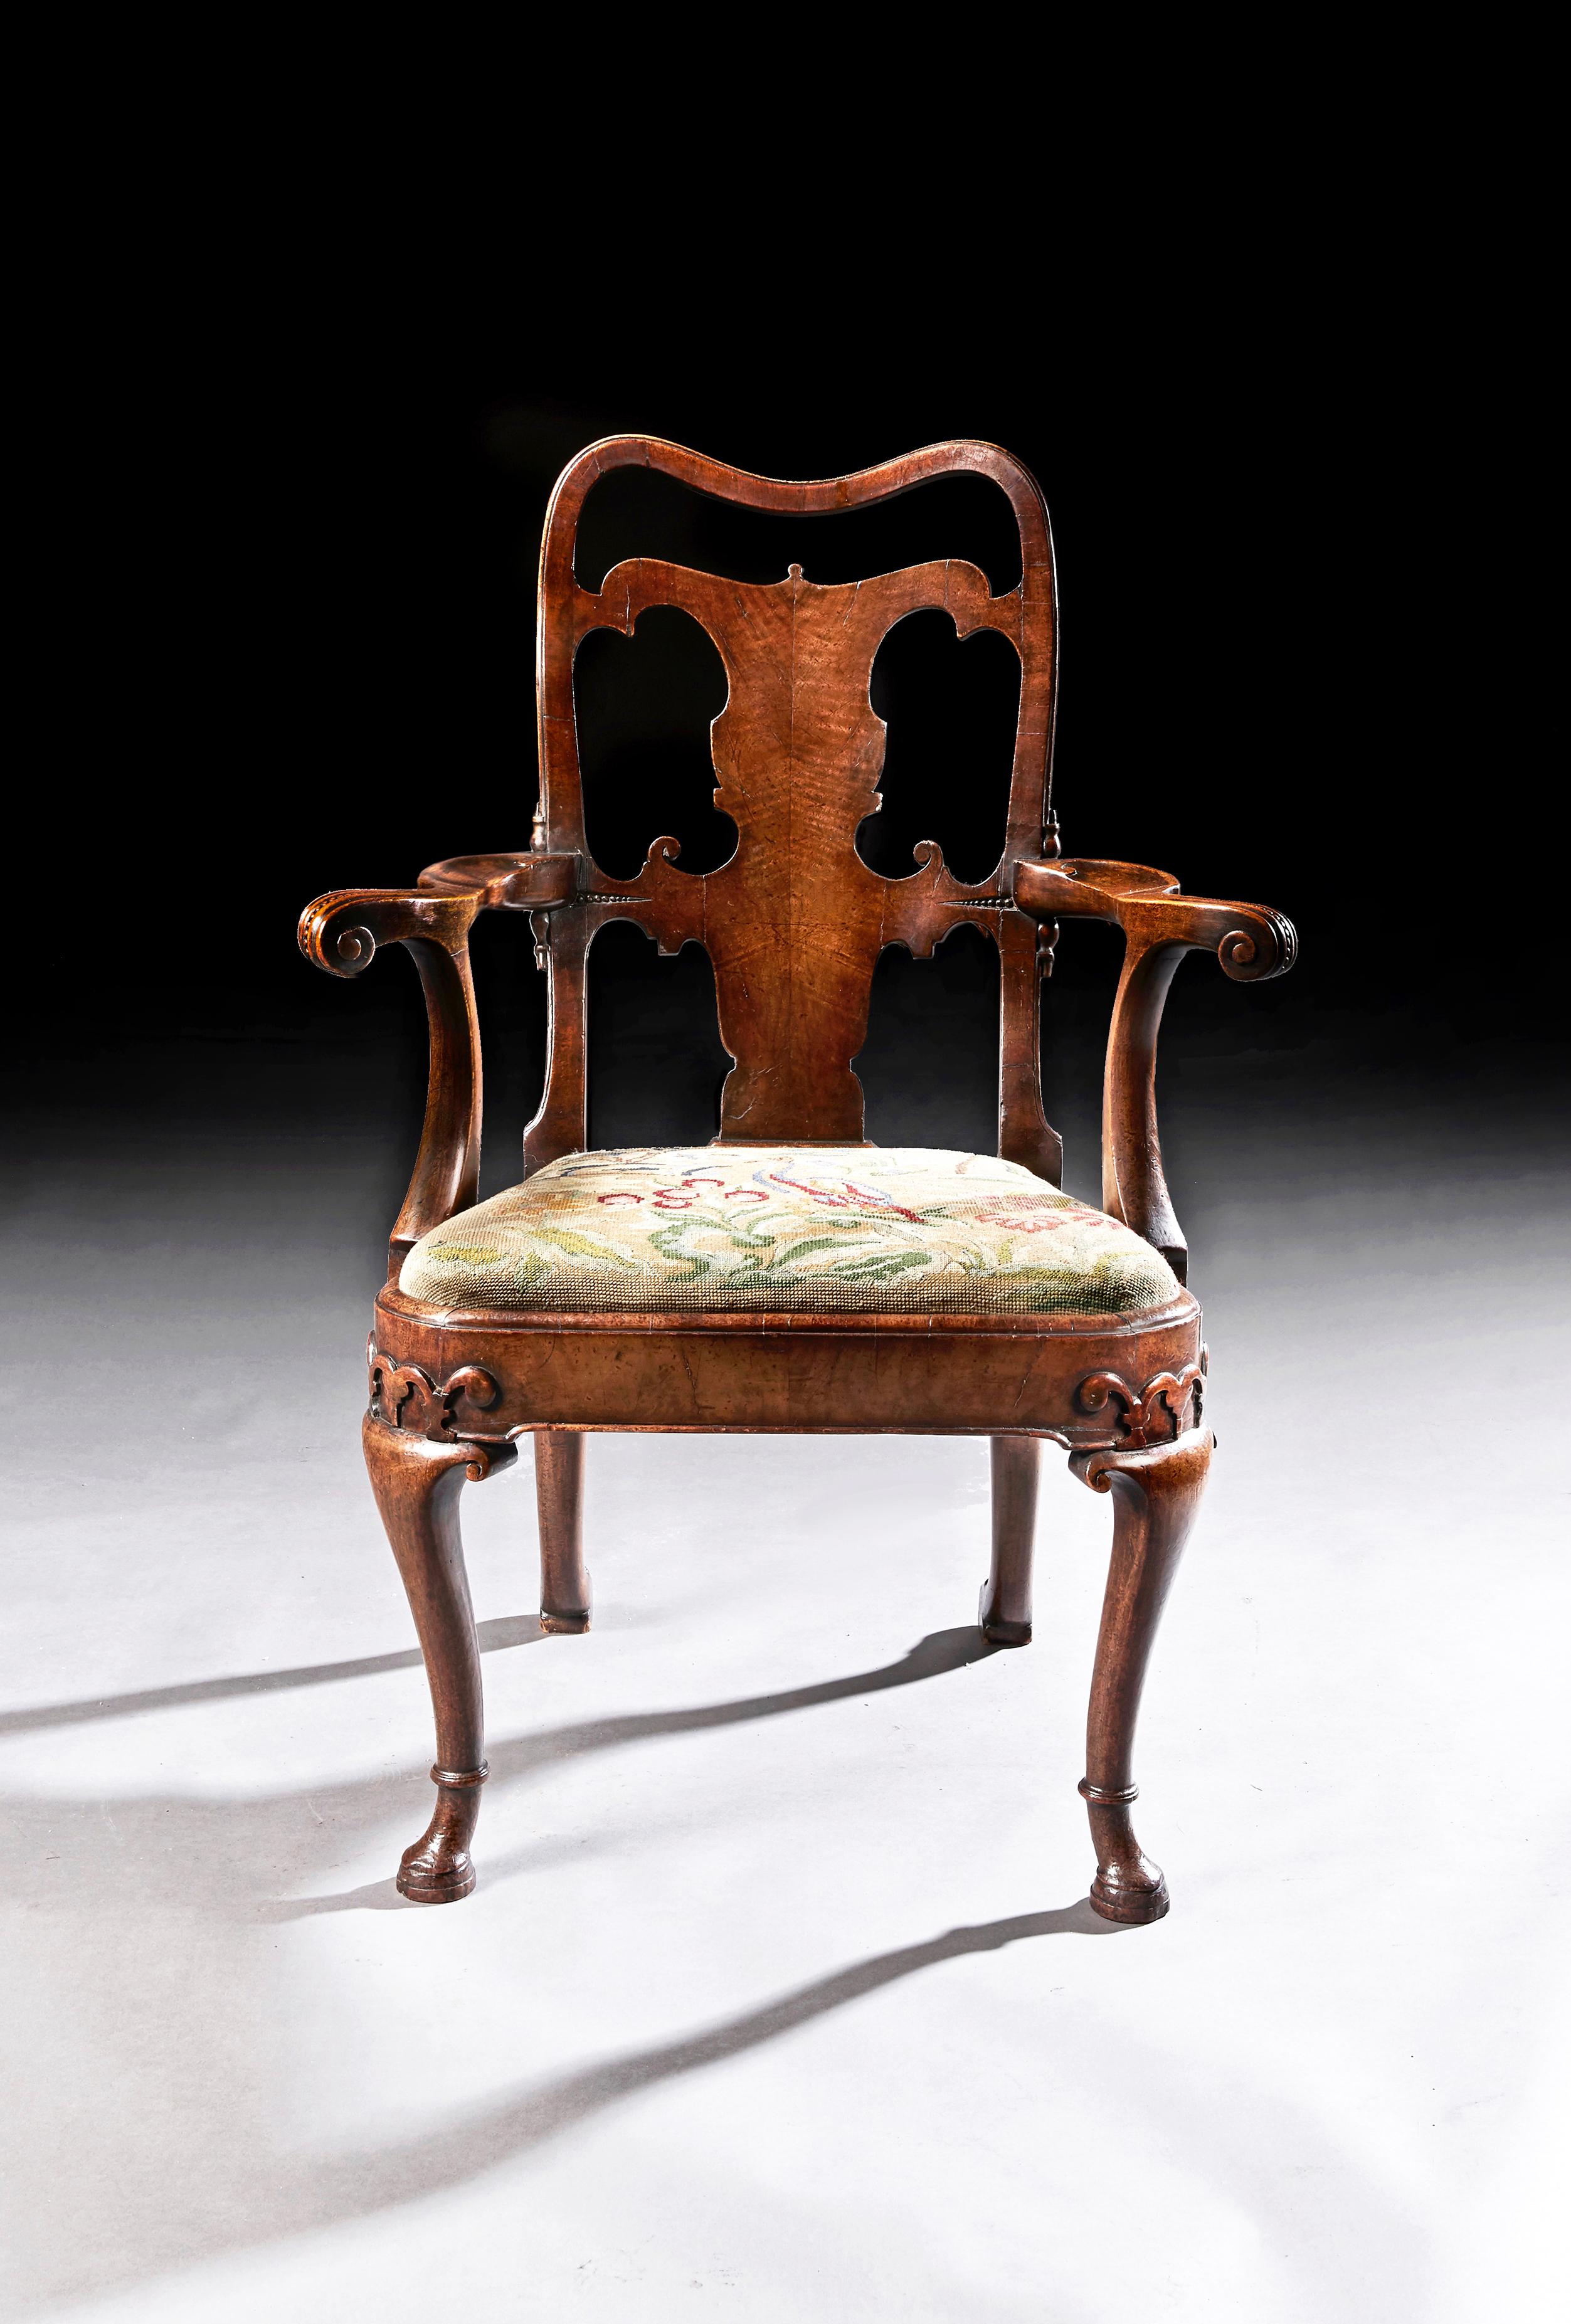 A very fine quality mid-19th century walnut open armchair,

English, circa 1860.

Of early Georgian design having a pierced back and solid shaped splat popularised by the likes of Giles Grendy in the George II era whilst unusually having a